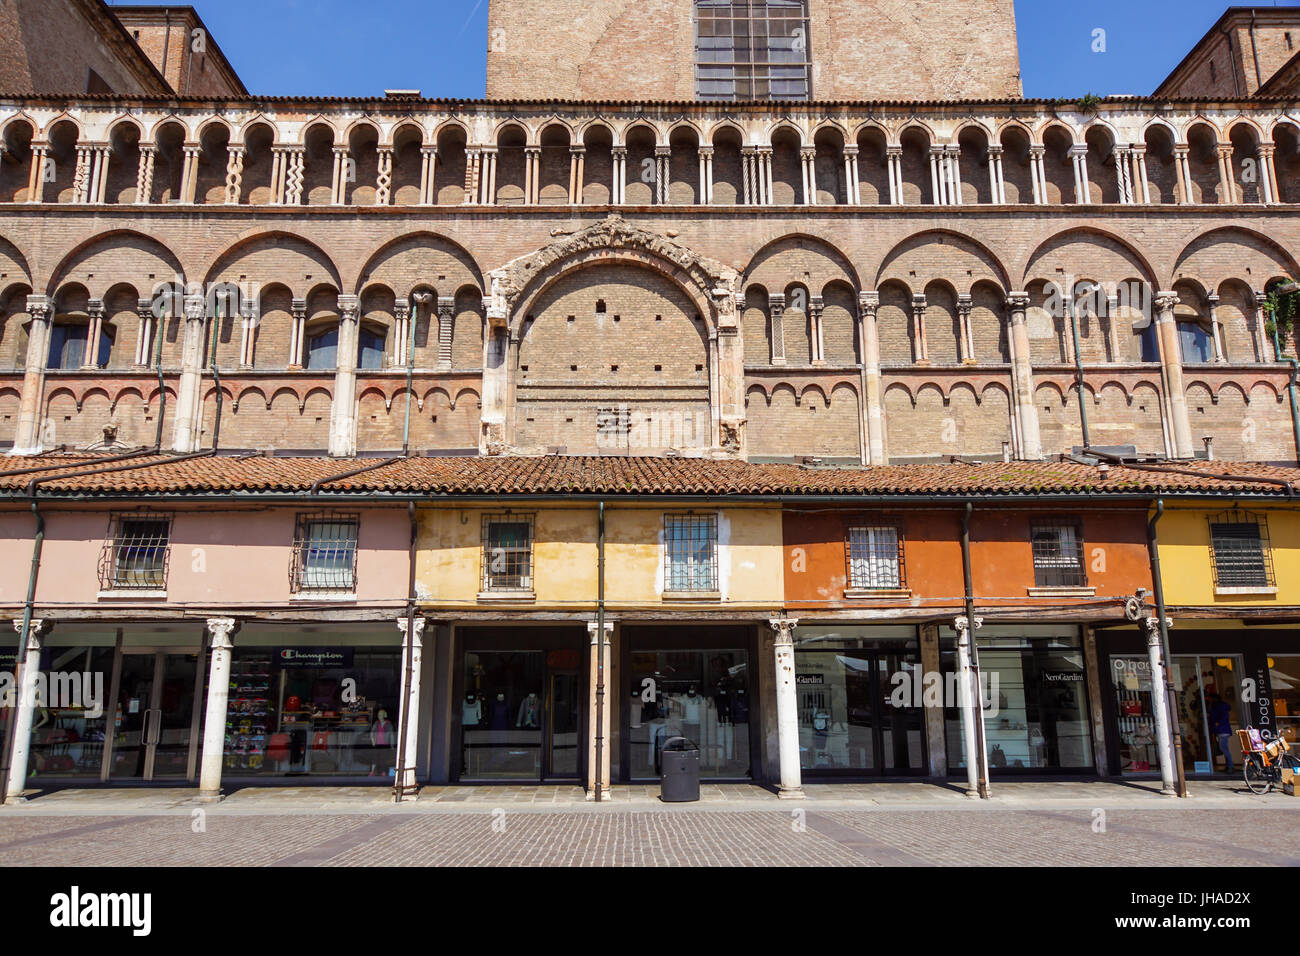 Ferrara, Italy - May 11, 2013. View of old building with people and shops, near the Ferrara Cathedral in the center of Ferrara, a graceful and important medieval town. Emilia-Romagna region Stock Photo